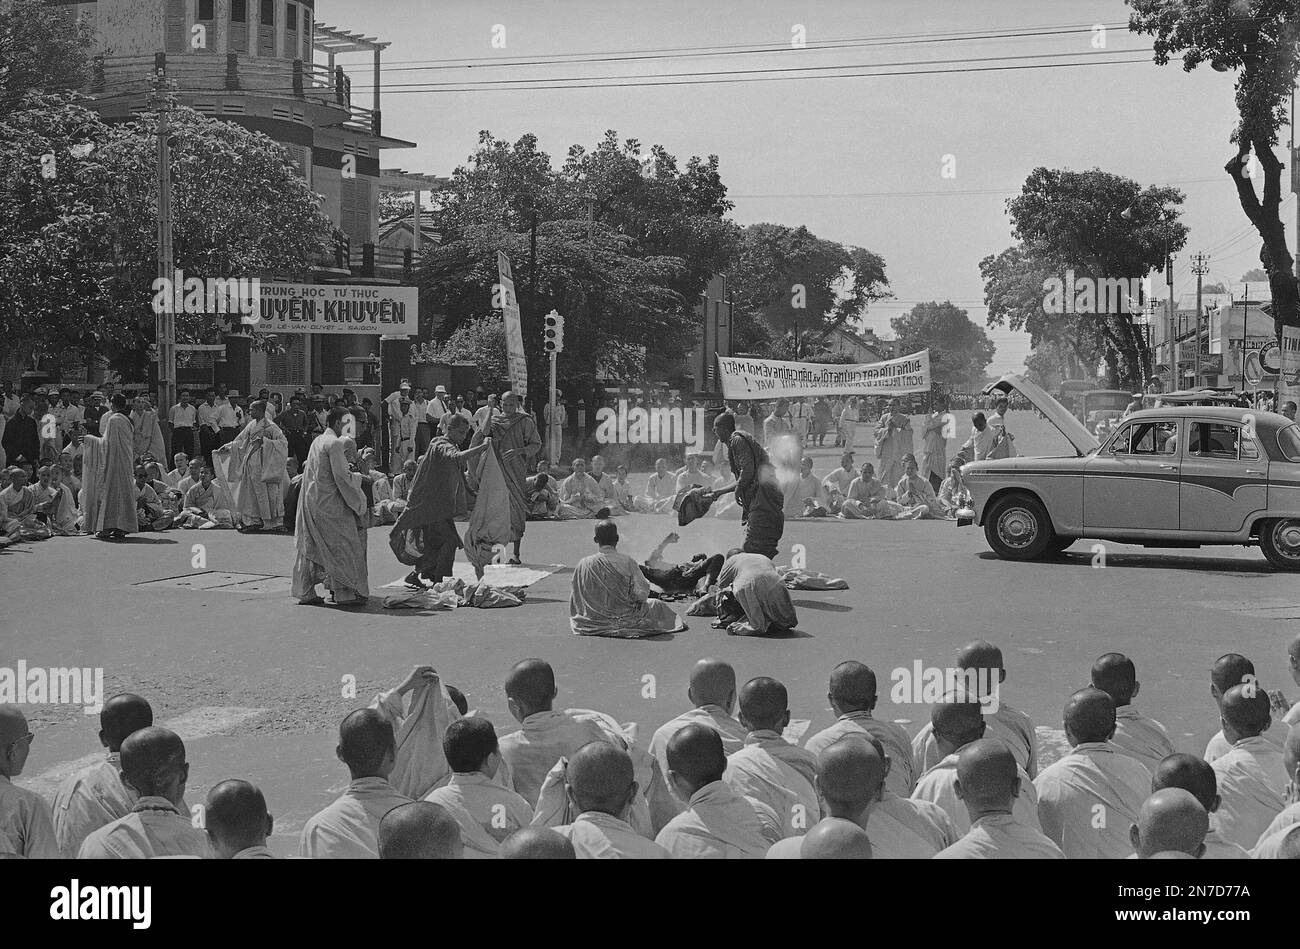 EDS NOTE: GRAPHIC CONTENT - This crowd in a main intersection of Saigon, Vietnam, watched the dramatic burning to death of an elderly Buddhist monk, Rev. Thich Quang Duc, June 11, 1963. As this picture was taken the flames from the monk's gasoline-soaked robes had died down and the charred body of the suicide lay in the street. Other monks approach to wrap his body in a Vietnamese flag. The monk's act was a public protest of alleged persecution of Buddhists by the Vietnamese government. (AP Photo/Malcolm Browne) Stock Photo